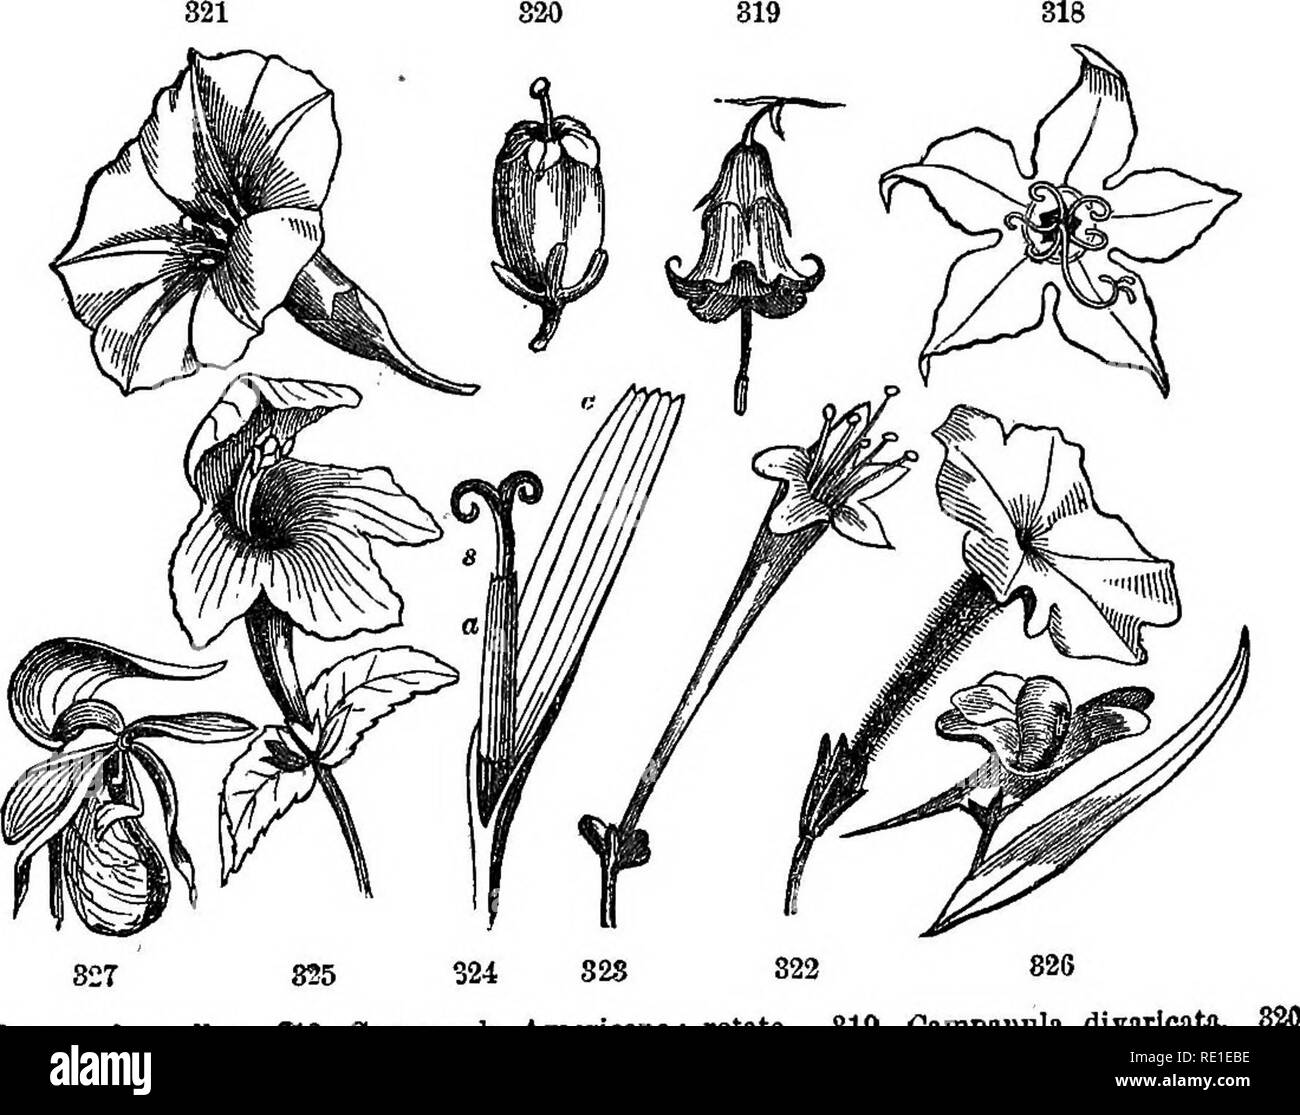 . Class-book of botany : being outlines of the structure, physiology and classification of plants : with a flora of the United States and Canada . Botany; Botany; Botany. THE FLORAL ENVELOPS, OR PERIANTH. 97 4'78. Uecbolate, urn-sliaped; an oblong or globular corolla with a narrow opening, as the whortleberry, heath. 479. FuNNBL-PORM (infundibuliform), narrow tubular below, gradu- ally enlarging to the border, as morning-glory. 480. Salver-form (hypocrateriform), the tube ending abruptly in a horizontal border, as in Phlox, Petunia, both of which are slightly ir- regular. 481. Tubular, a cylin Stock Photo